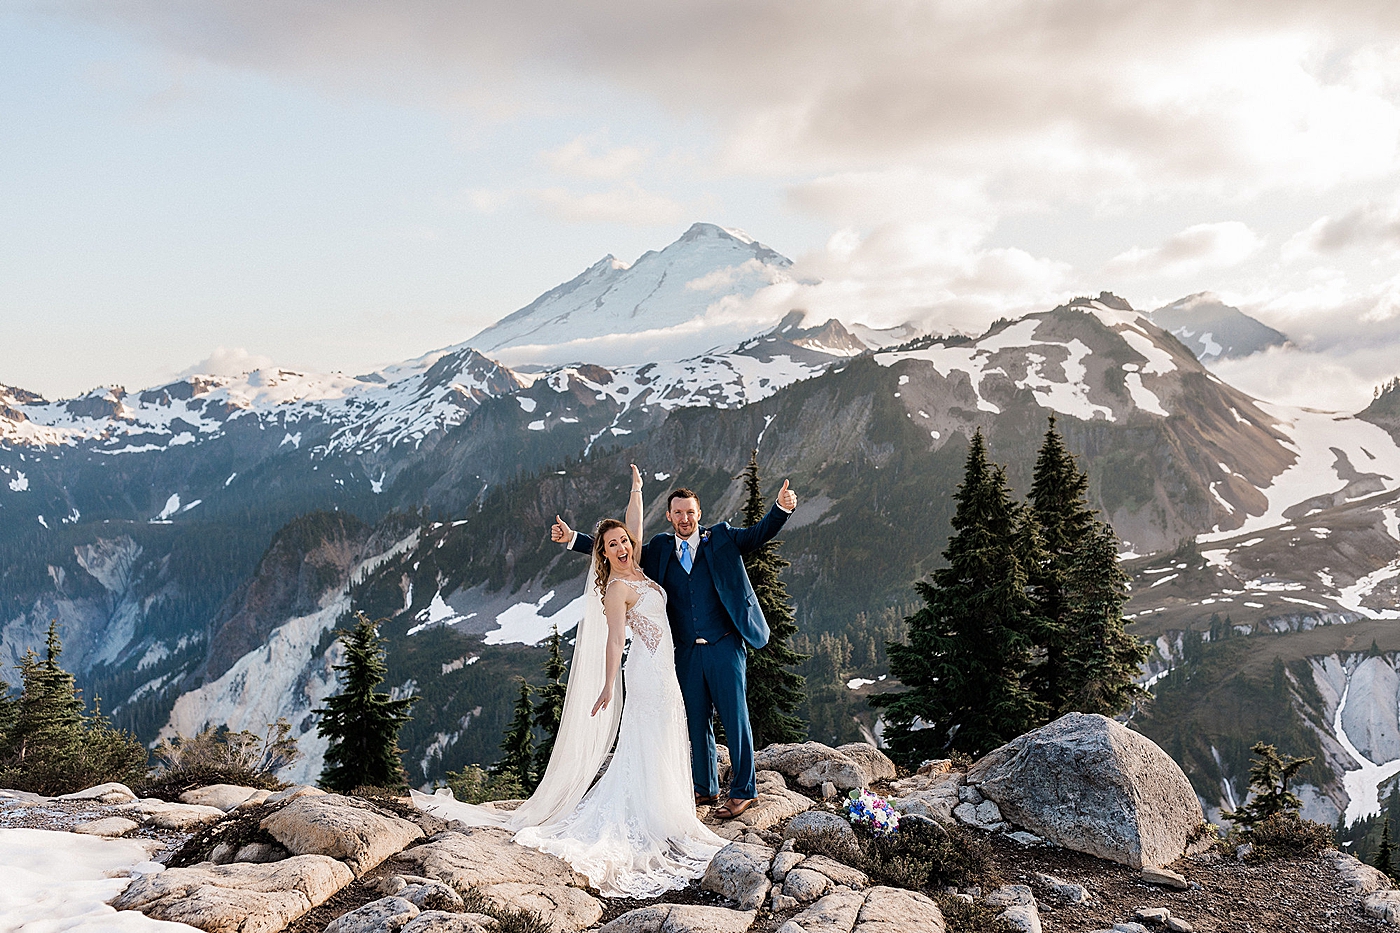 Summer elopement in the North Cascades at Artist Point. Photo by Megan Montalvo Photography.